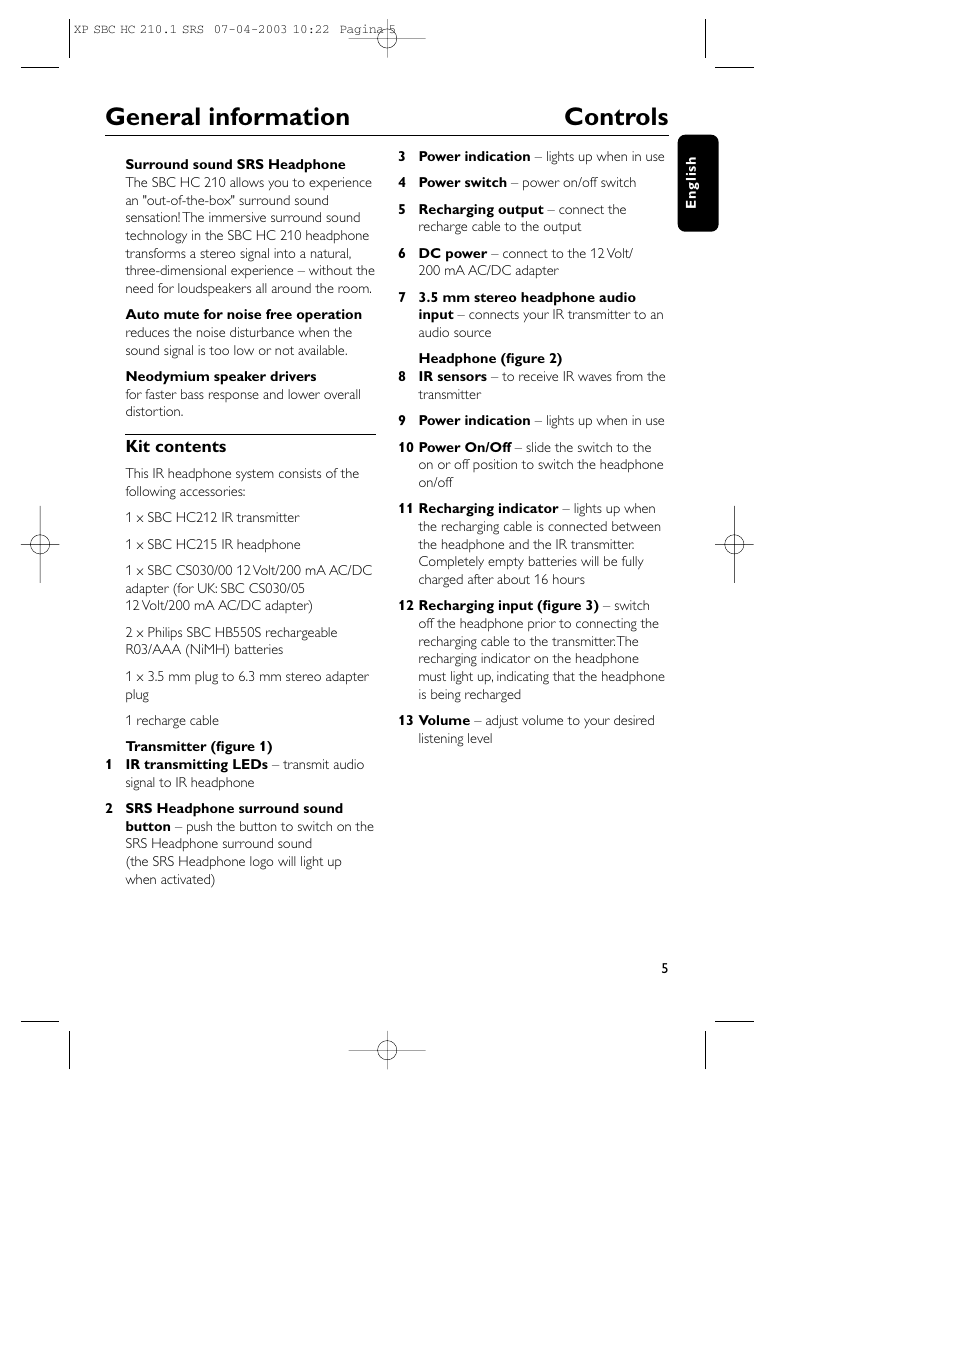 General information controls | Philips SBC HC210 User Manual | Page 5 / 102